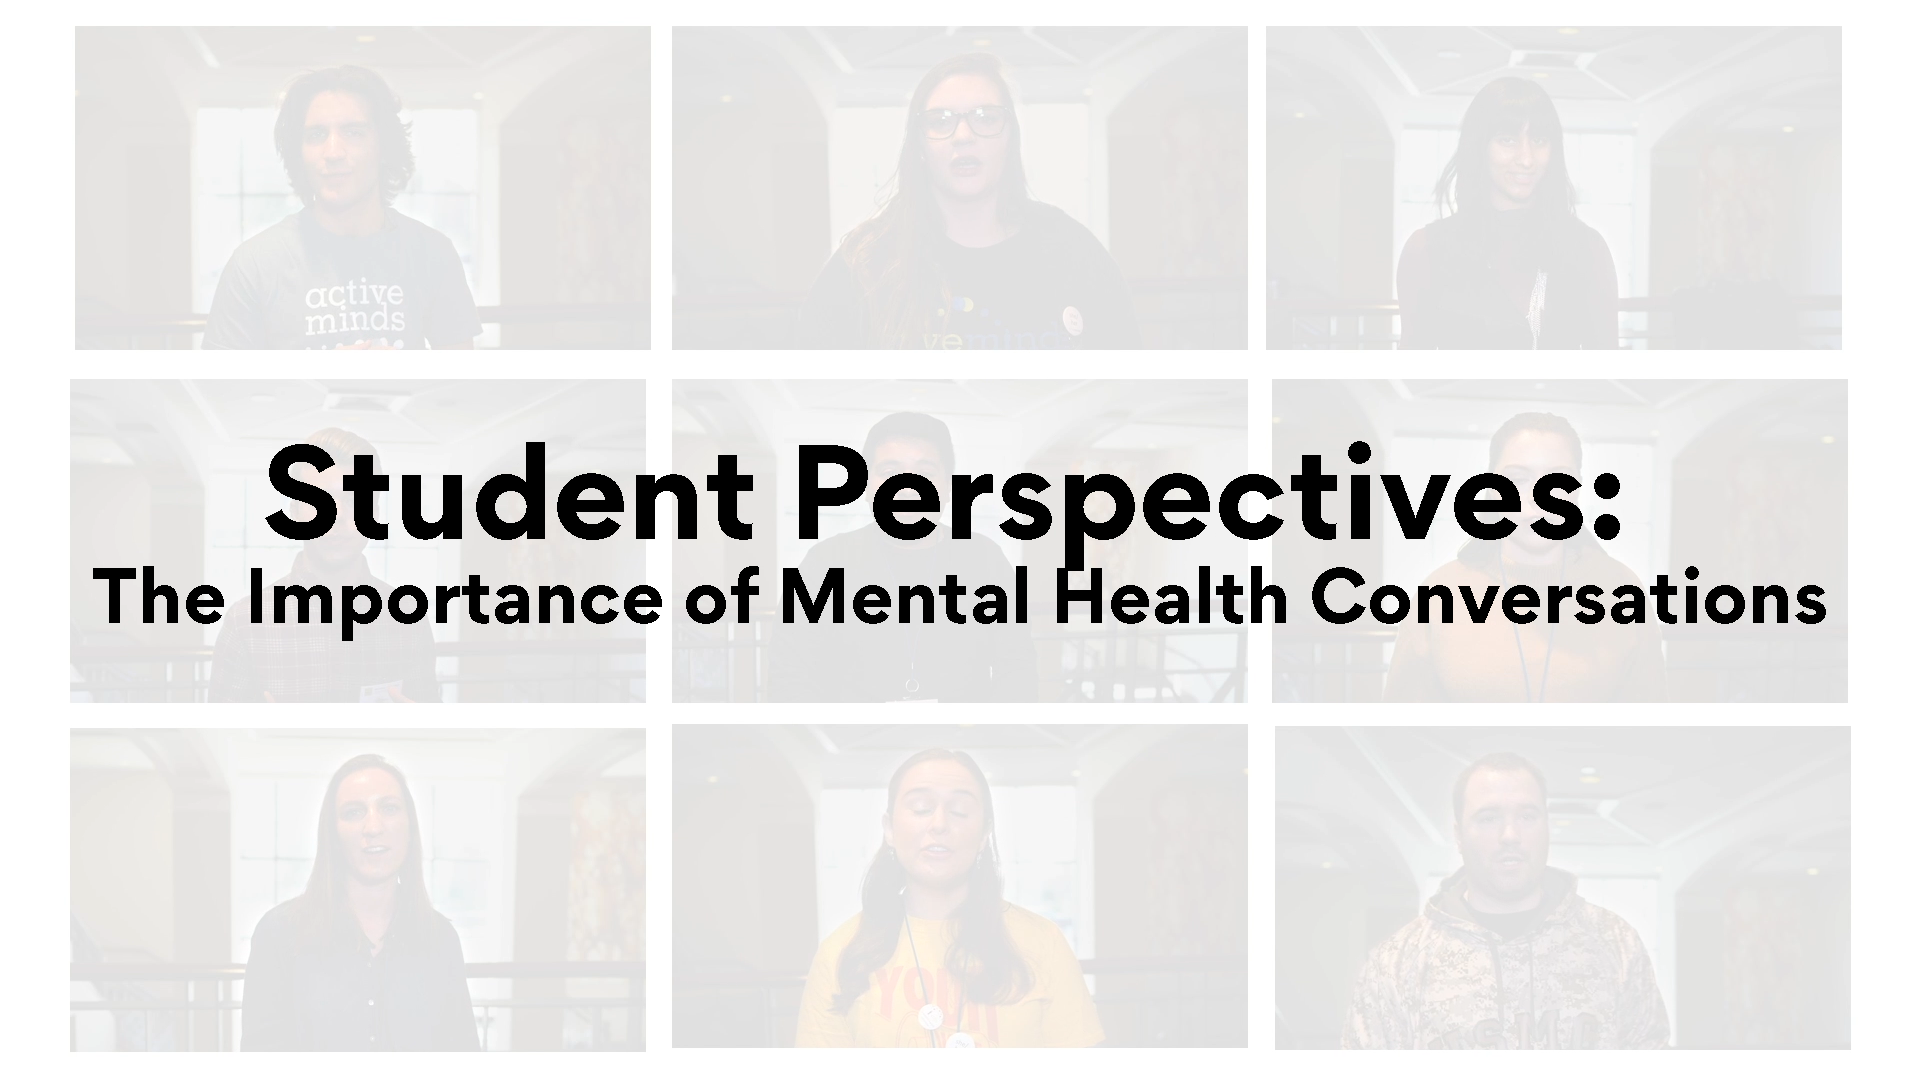 Student Perspectives: The Importance of Mental Health Conversations